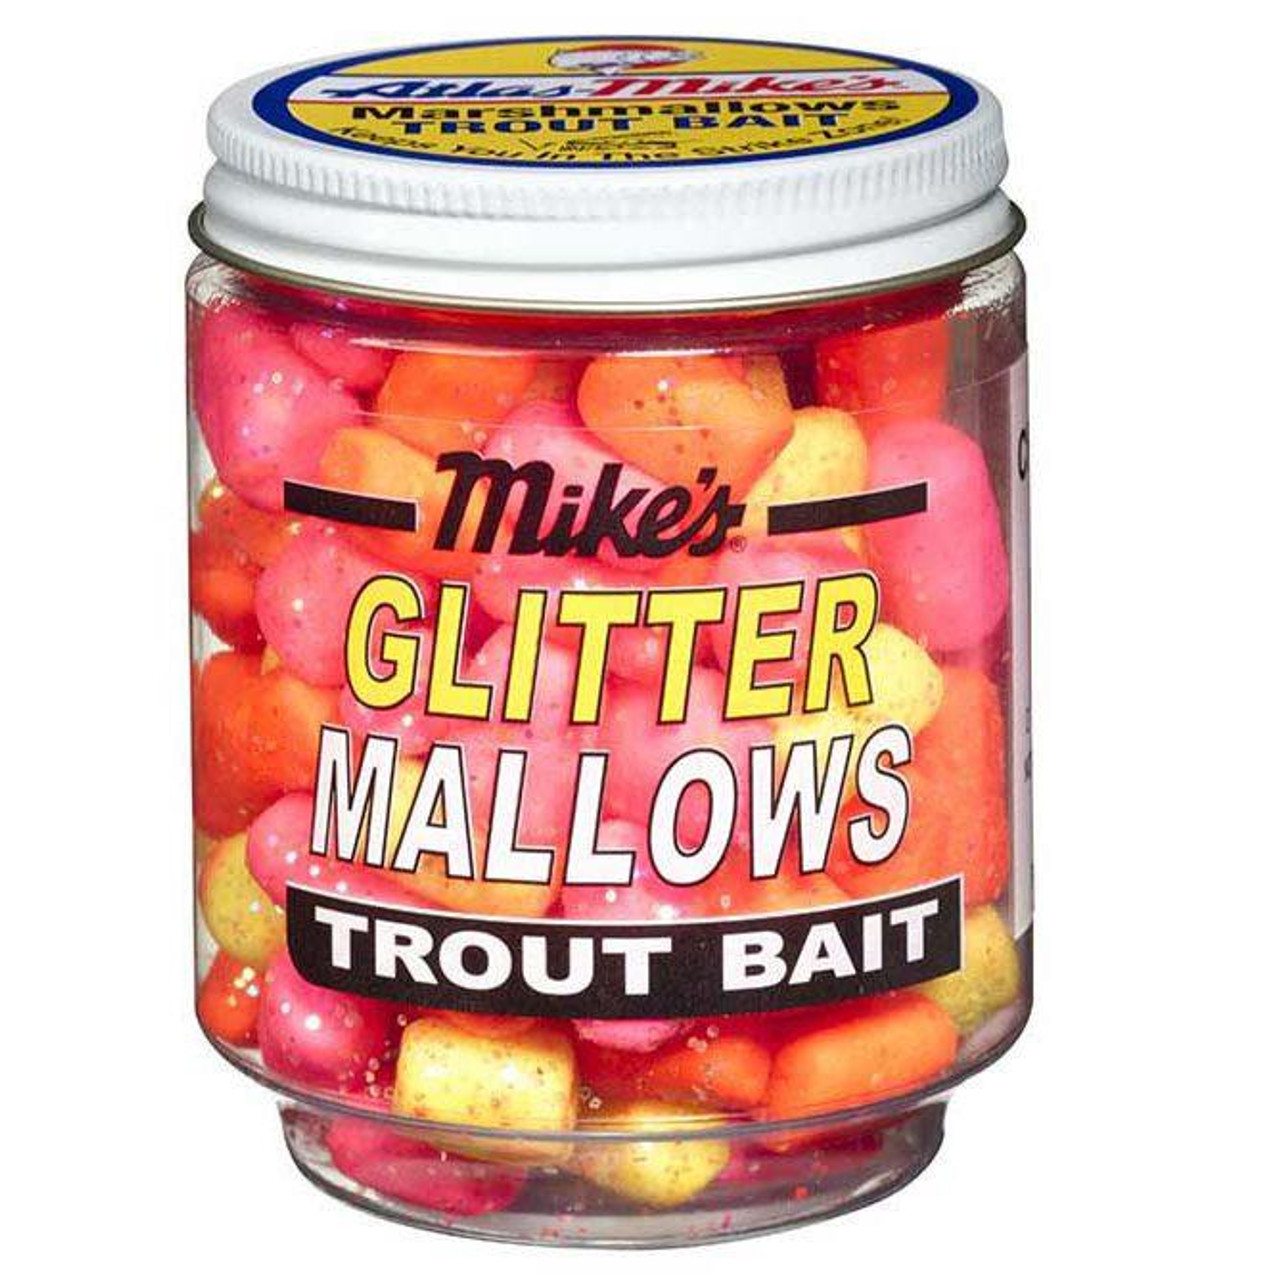 Mike's Glitter Mallows Trout Bait - Assorted/Cheese